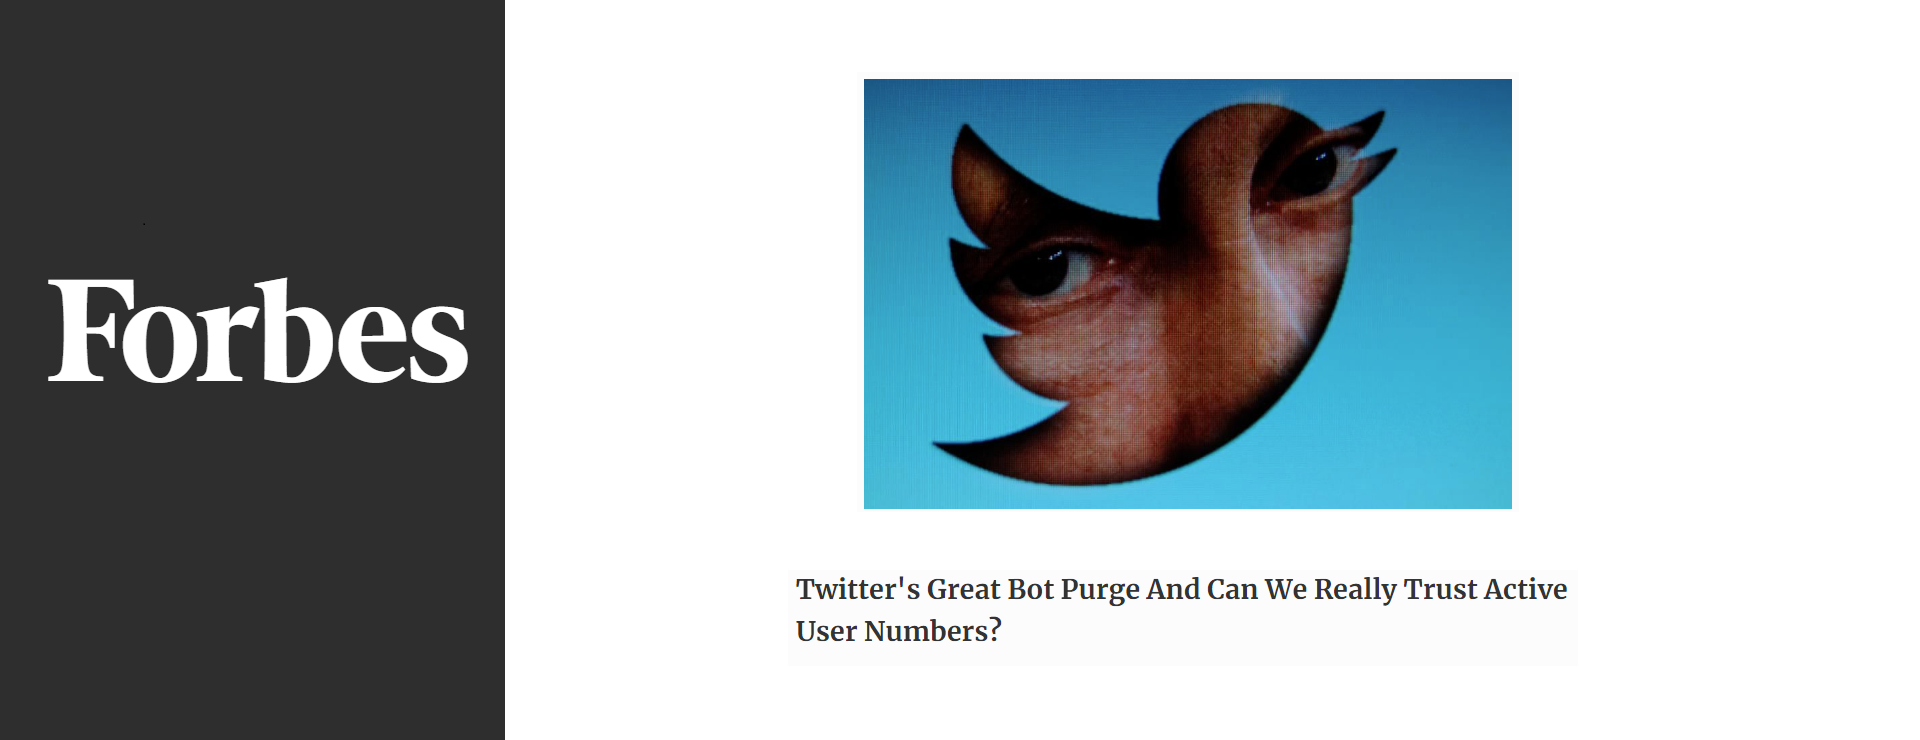 Twitter’s Great Bot Purge And Can We Really Trust Active User Numbers